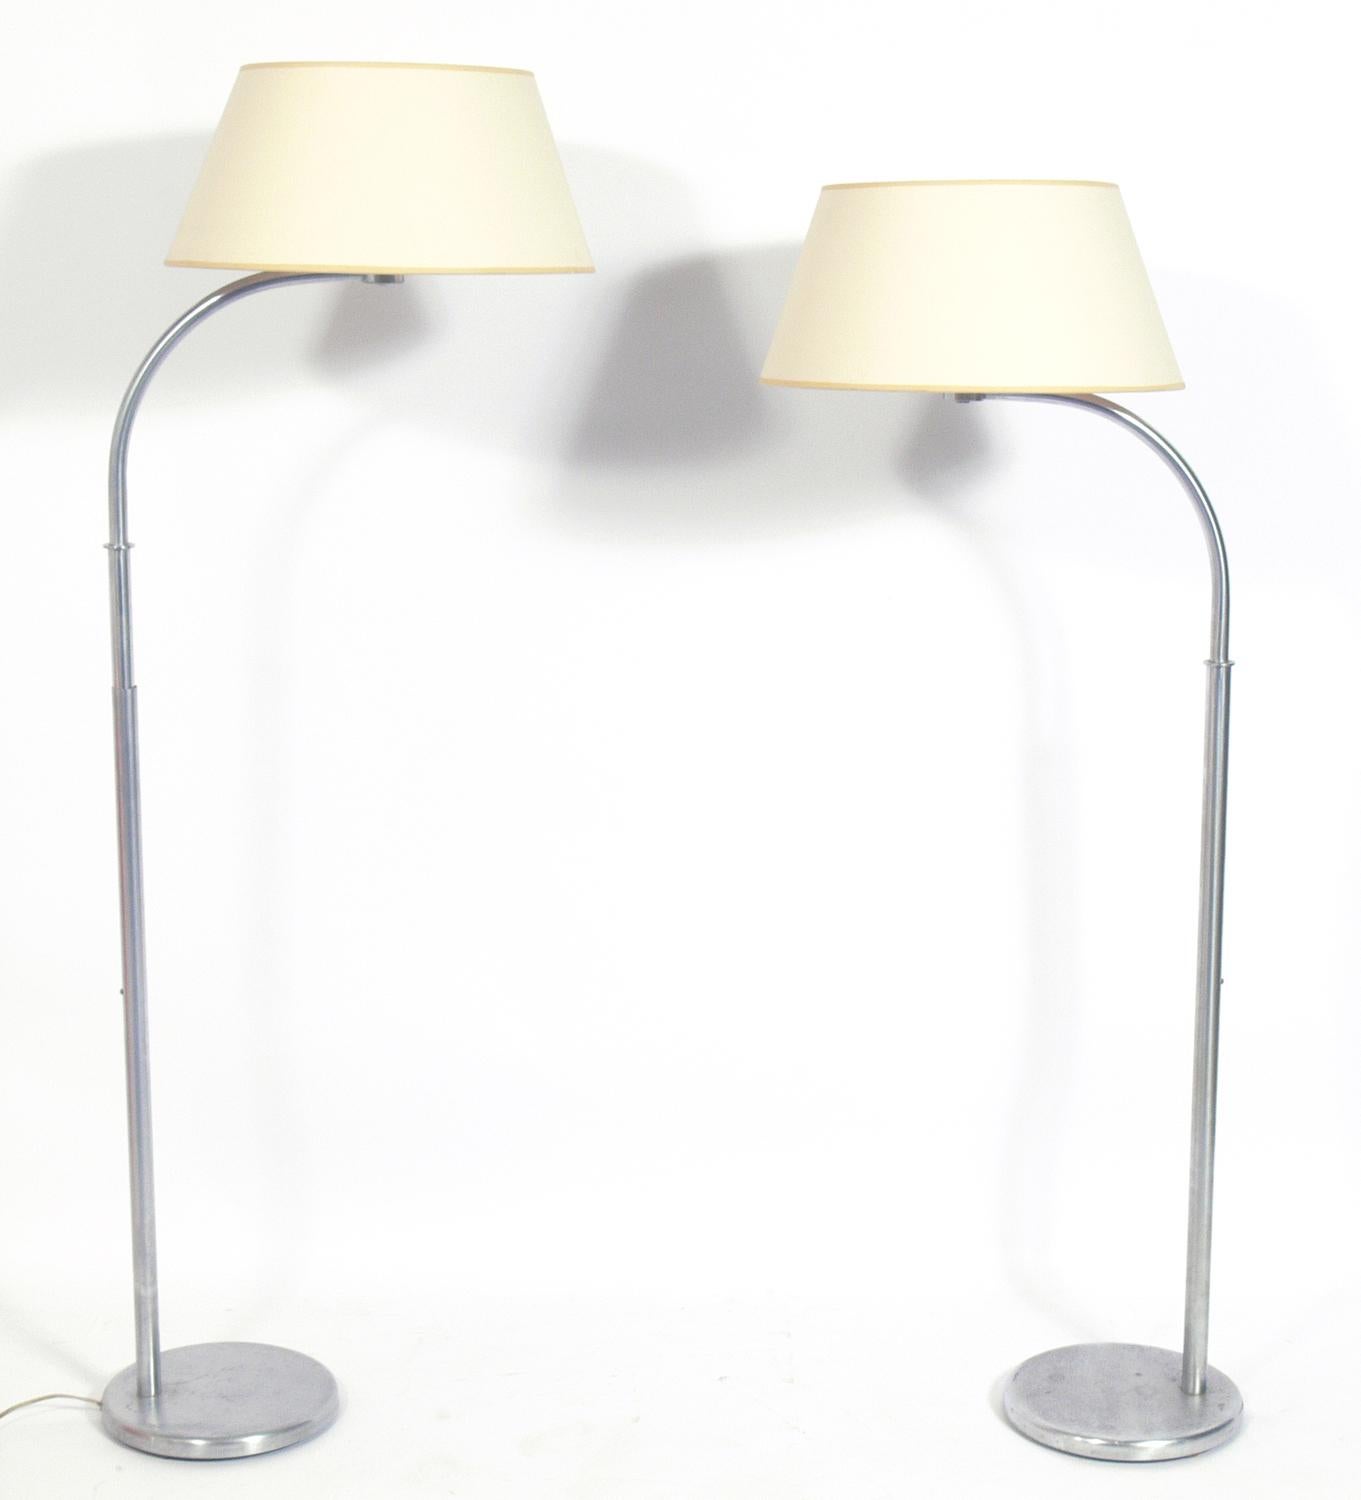 Pair of early Art Deco floor lamps, designed by Walter Von Nessen for Nessen Studios, American, circa 1940s. They slide up and down for an adjustable height. They have been rewired and are ready to use.